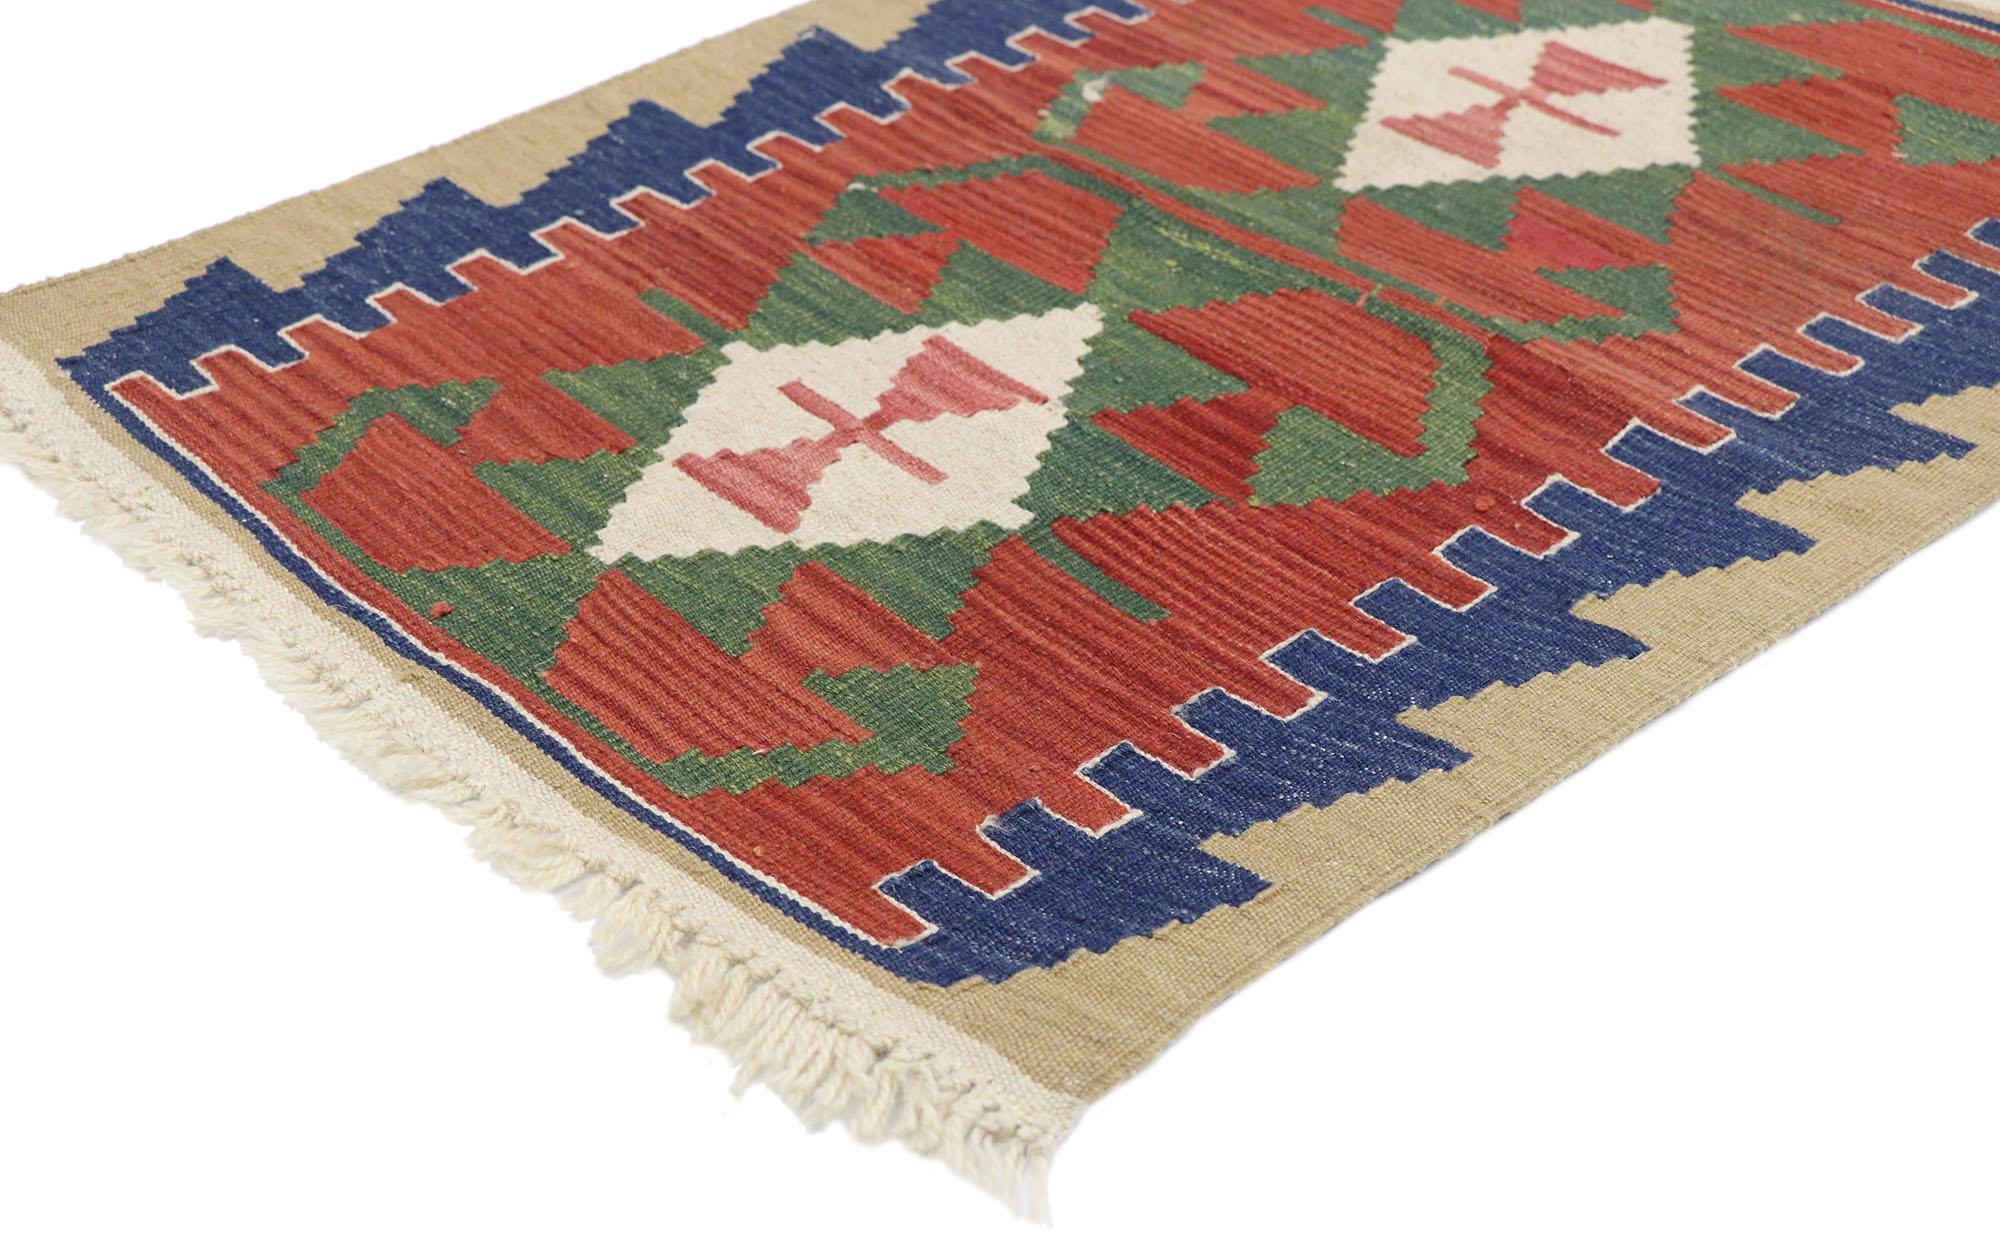 77881, vintage Persian Shiraz Kilim rug with Tribal style. Full of tiny details and a bold expressive design combined with vibrant colors and tribal style, this hand-woven wool vintage Persian Shiraz kilim rug is a captivating vision of woven